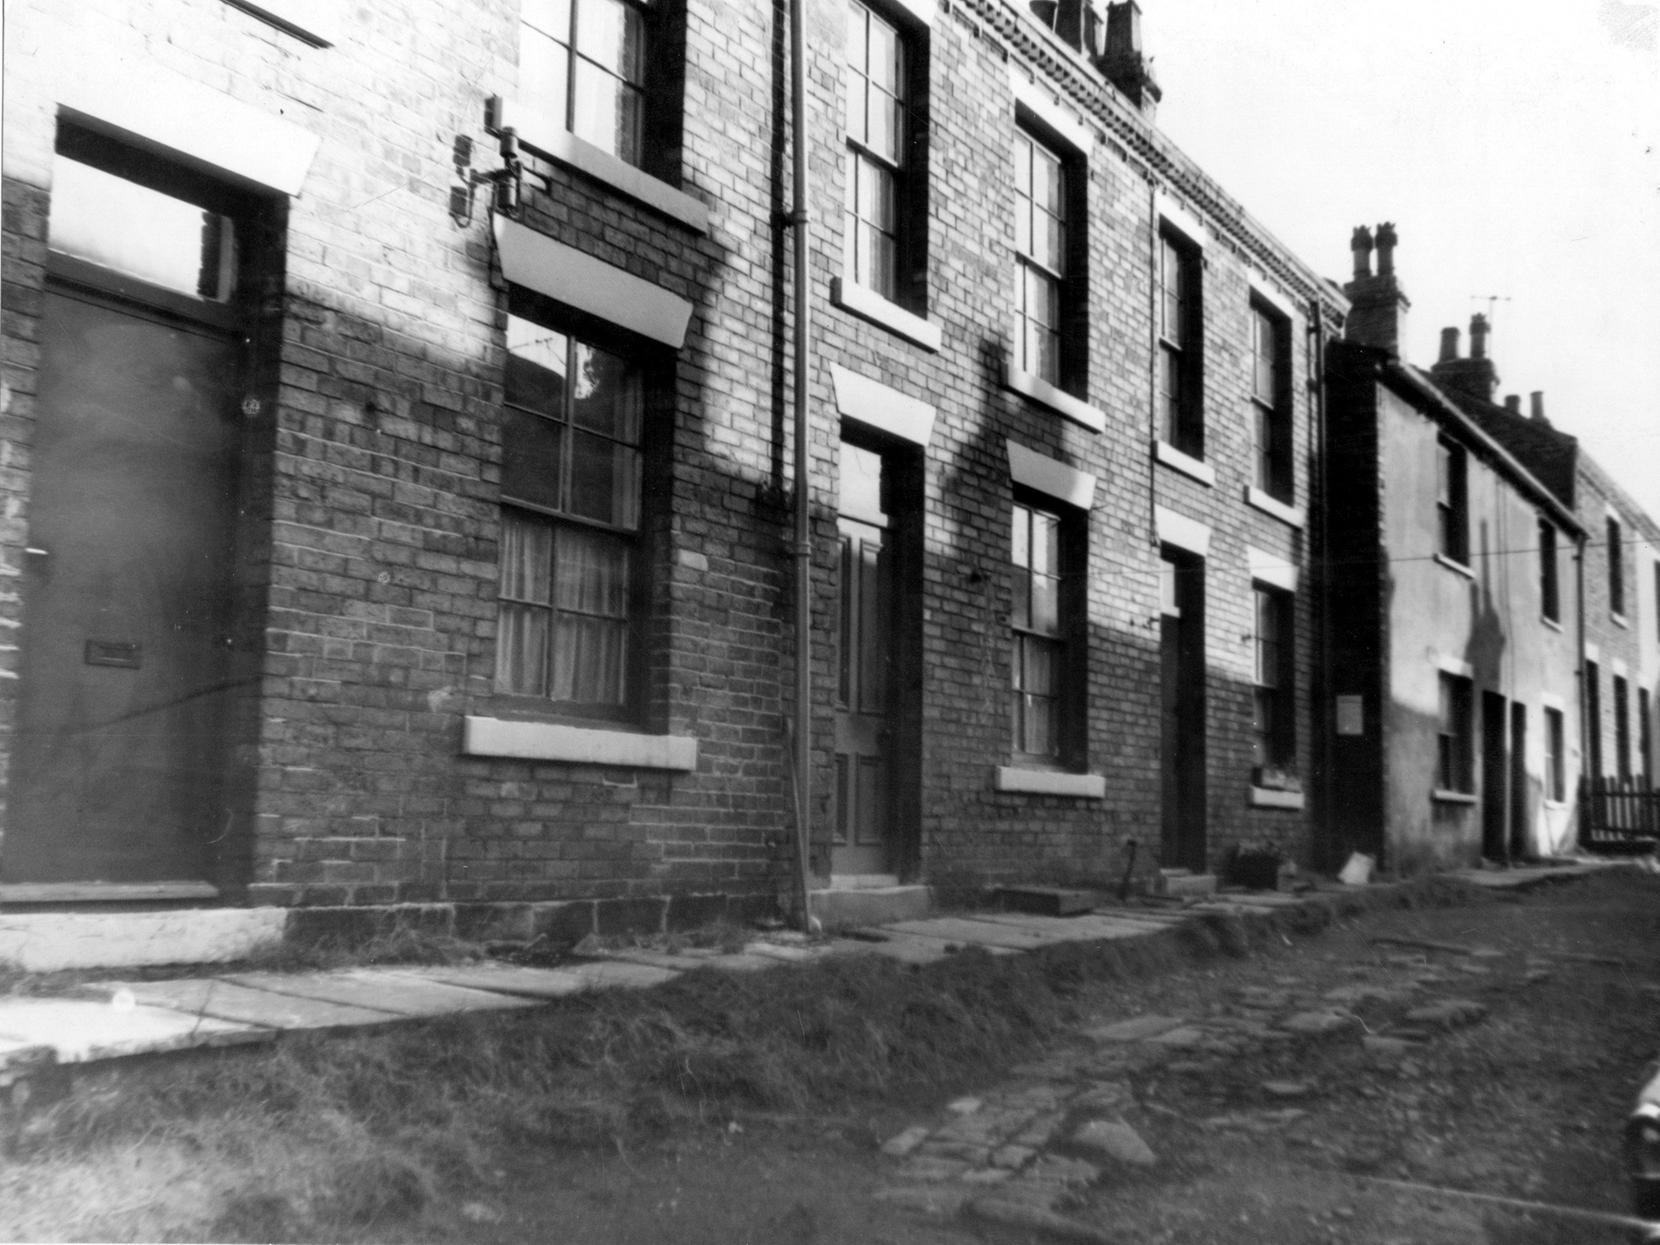 A view of terraced houses on Green Terrace. There is an unmade road in the foreground.